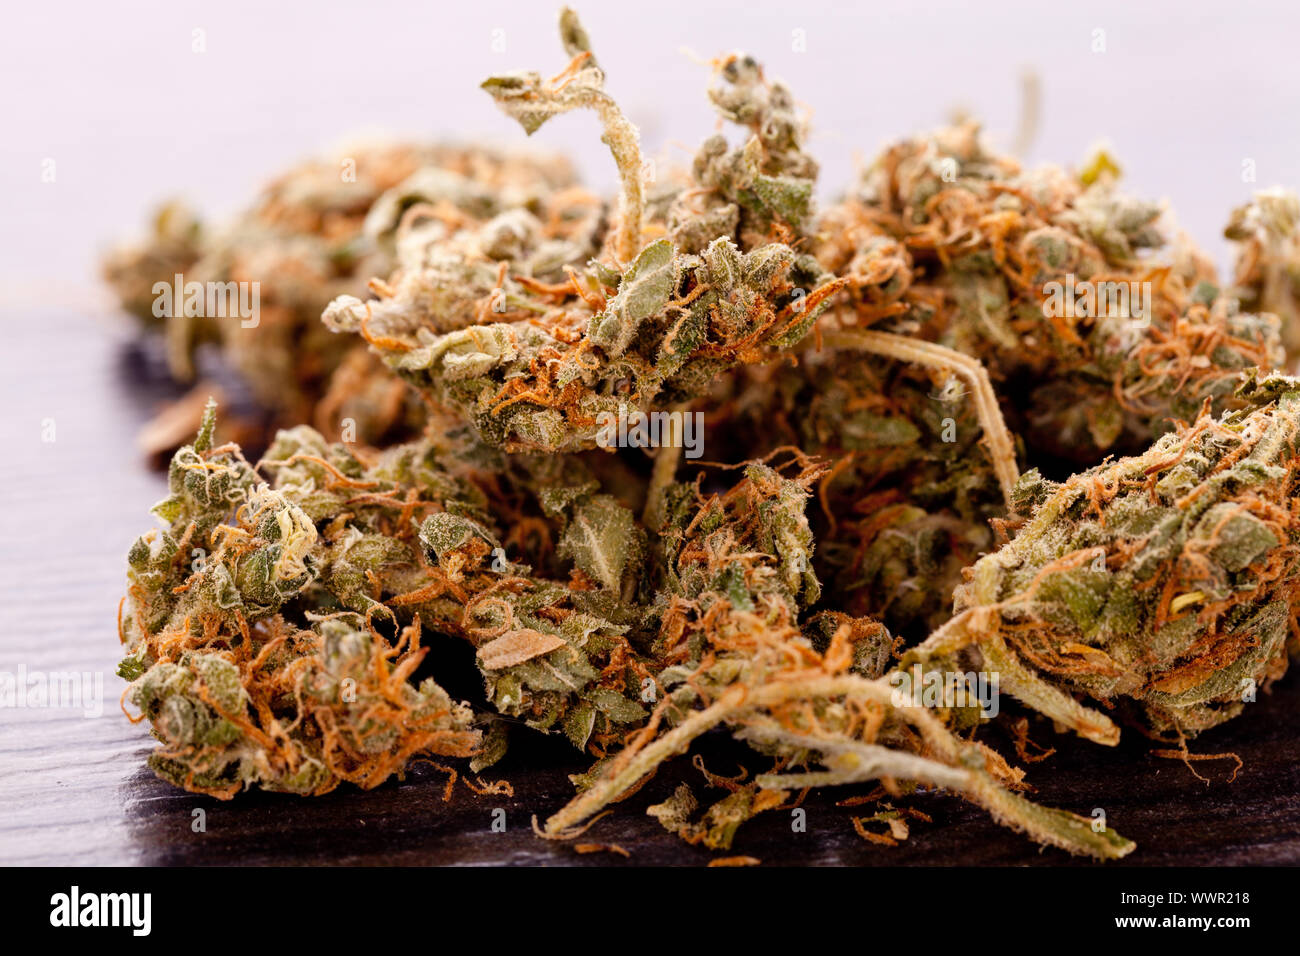 Close up Dried Marijuana Leaves on the Table Stock Photo